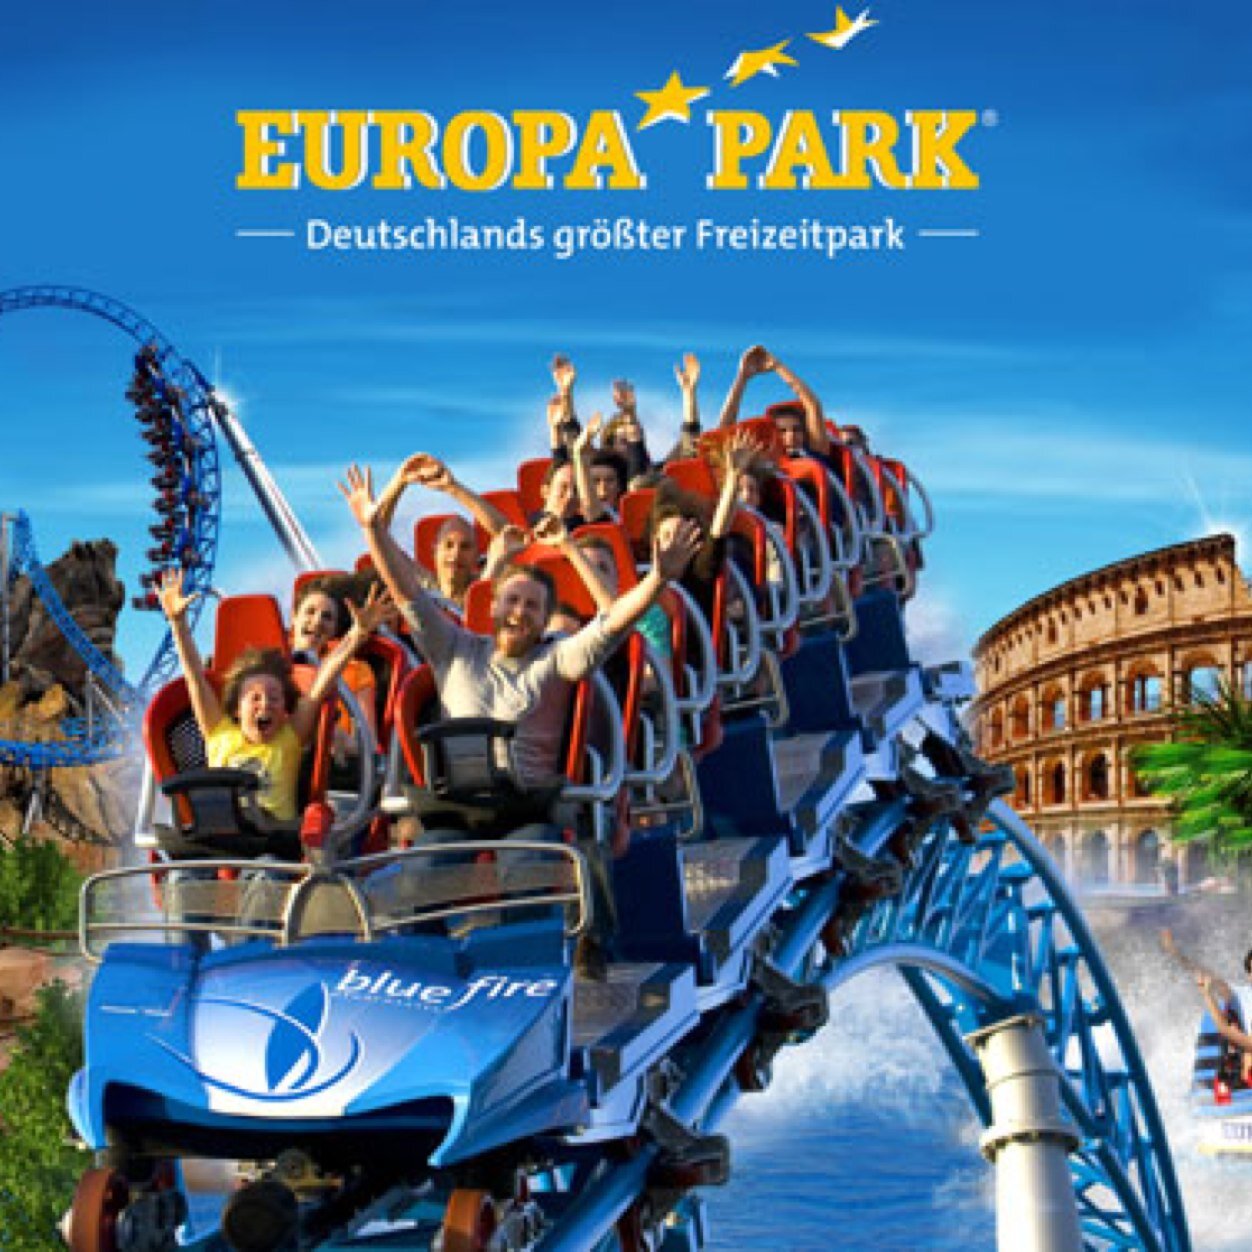 Compte des FANS d'Europa park ! The best park of attractions in Europa ! Follow us for the news of EP !